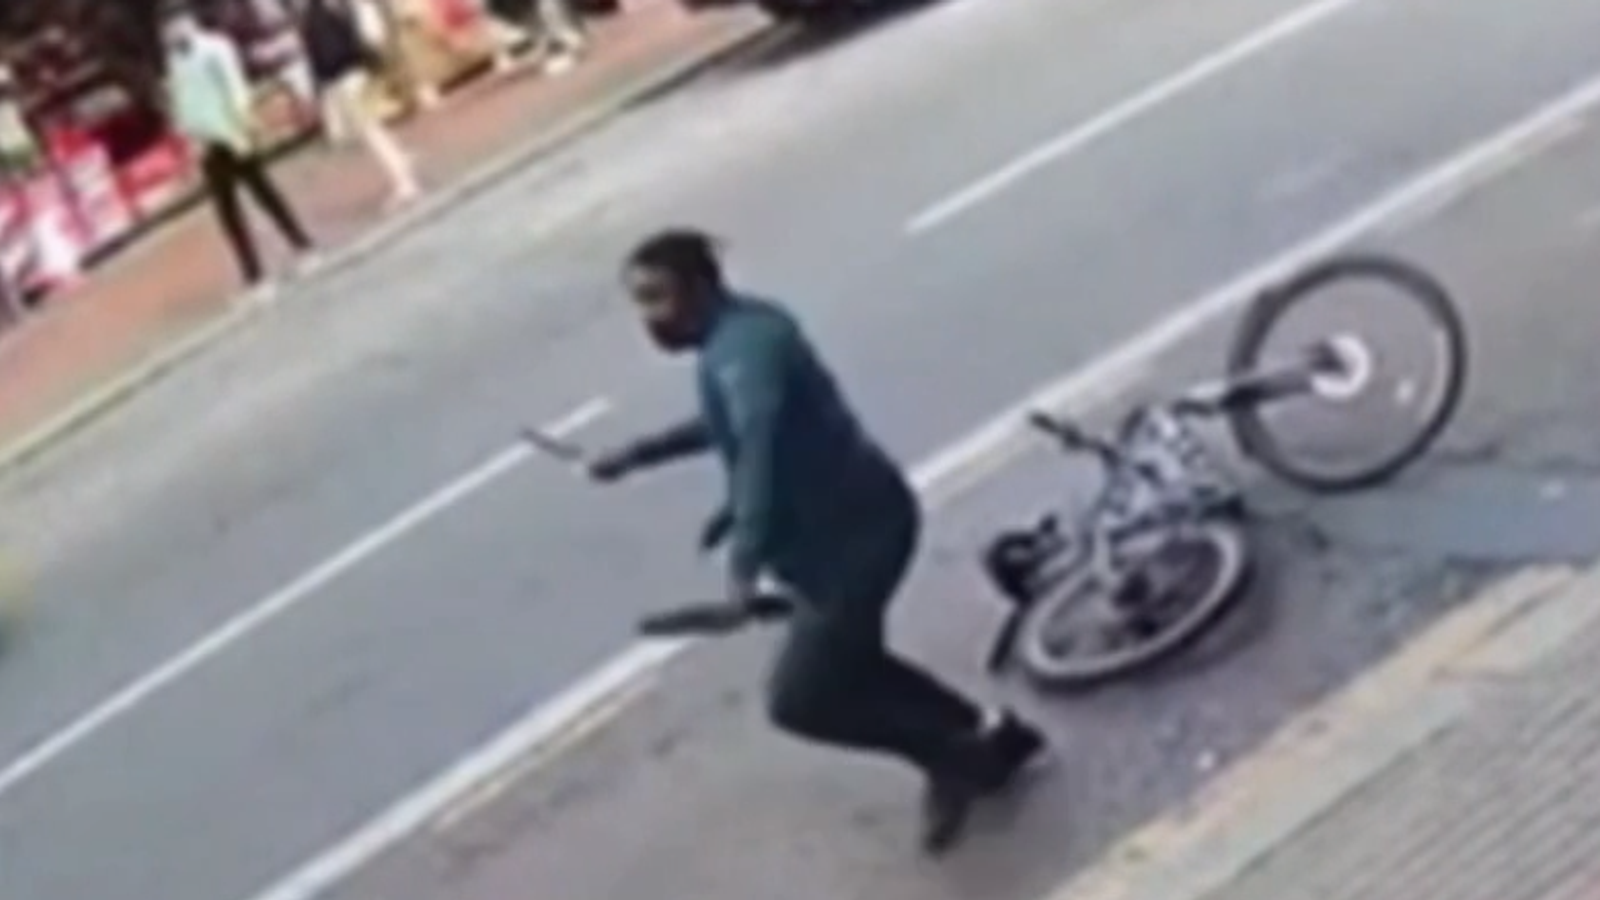 Shocking footage shows London Deliveroo driver being attacked in broad daylight by knife-wielding man | UK News